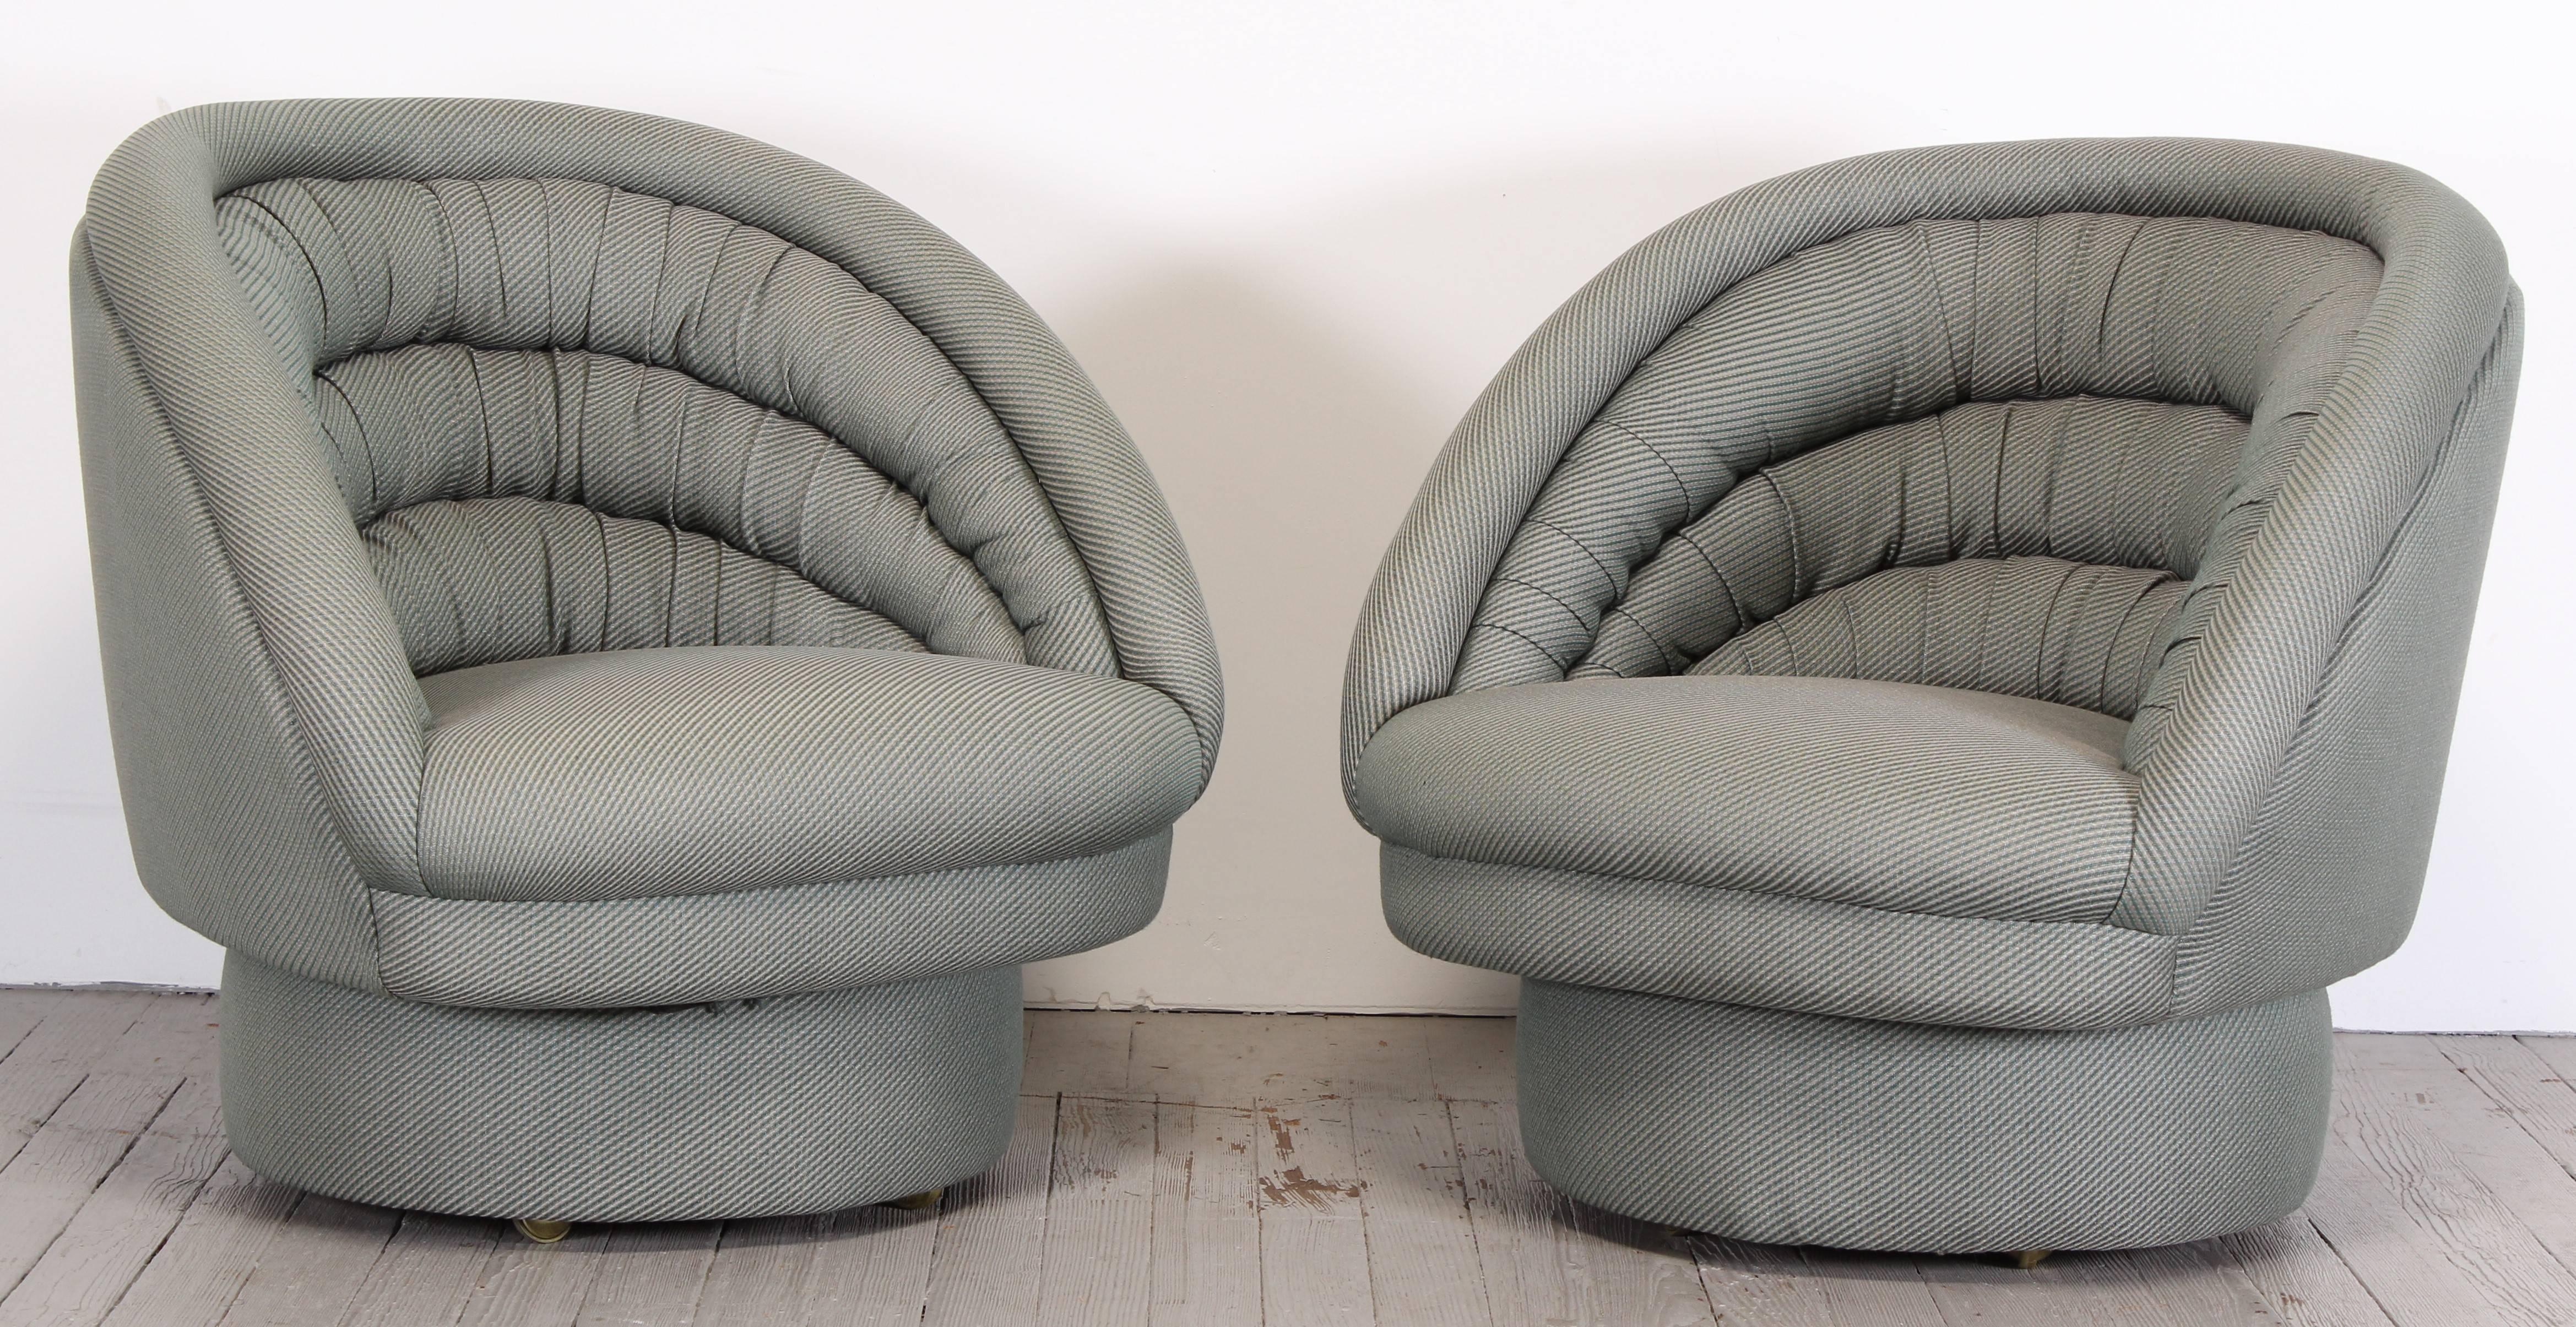 Pair of "Crescent" swivel and rolling chairs designed by Vladimir Kagan.
Chairs are structurally sound, fabric is approximately 15 years old and in very good condition.